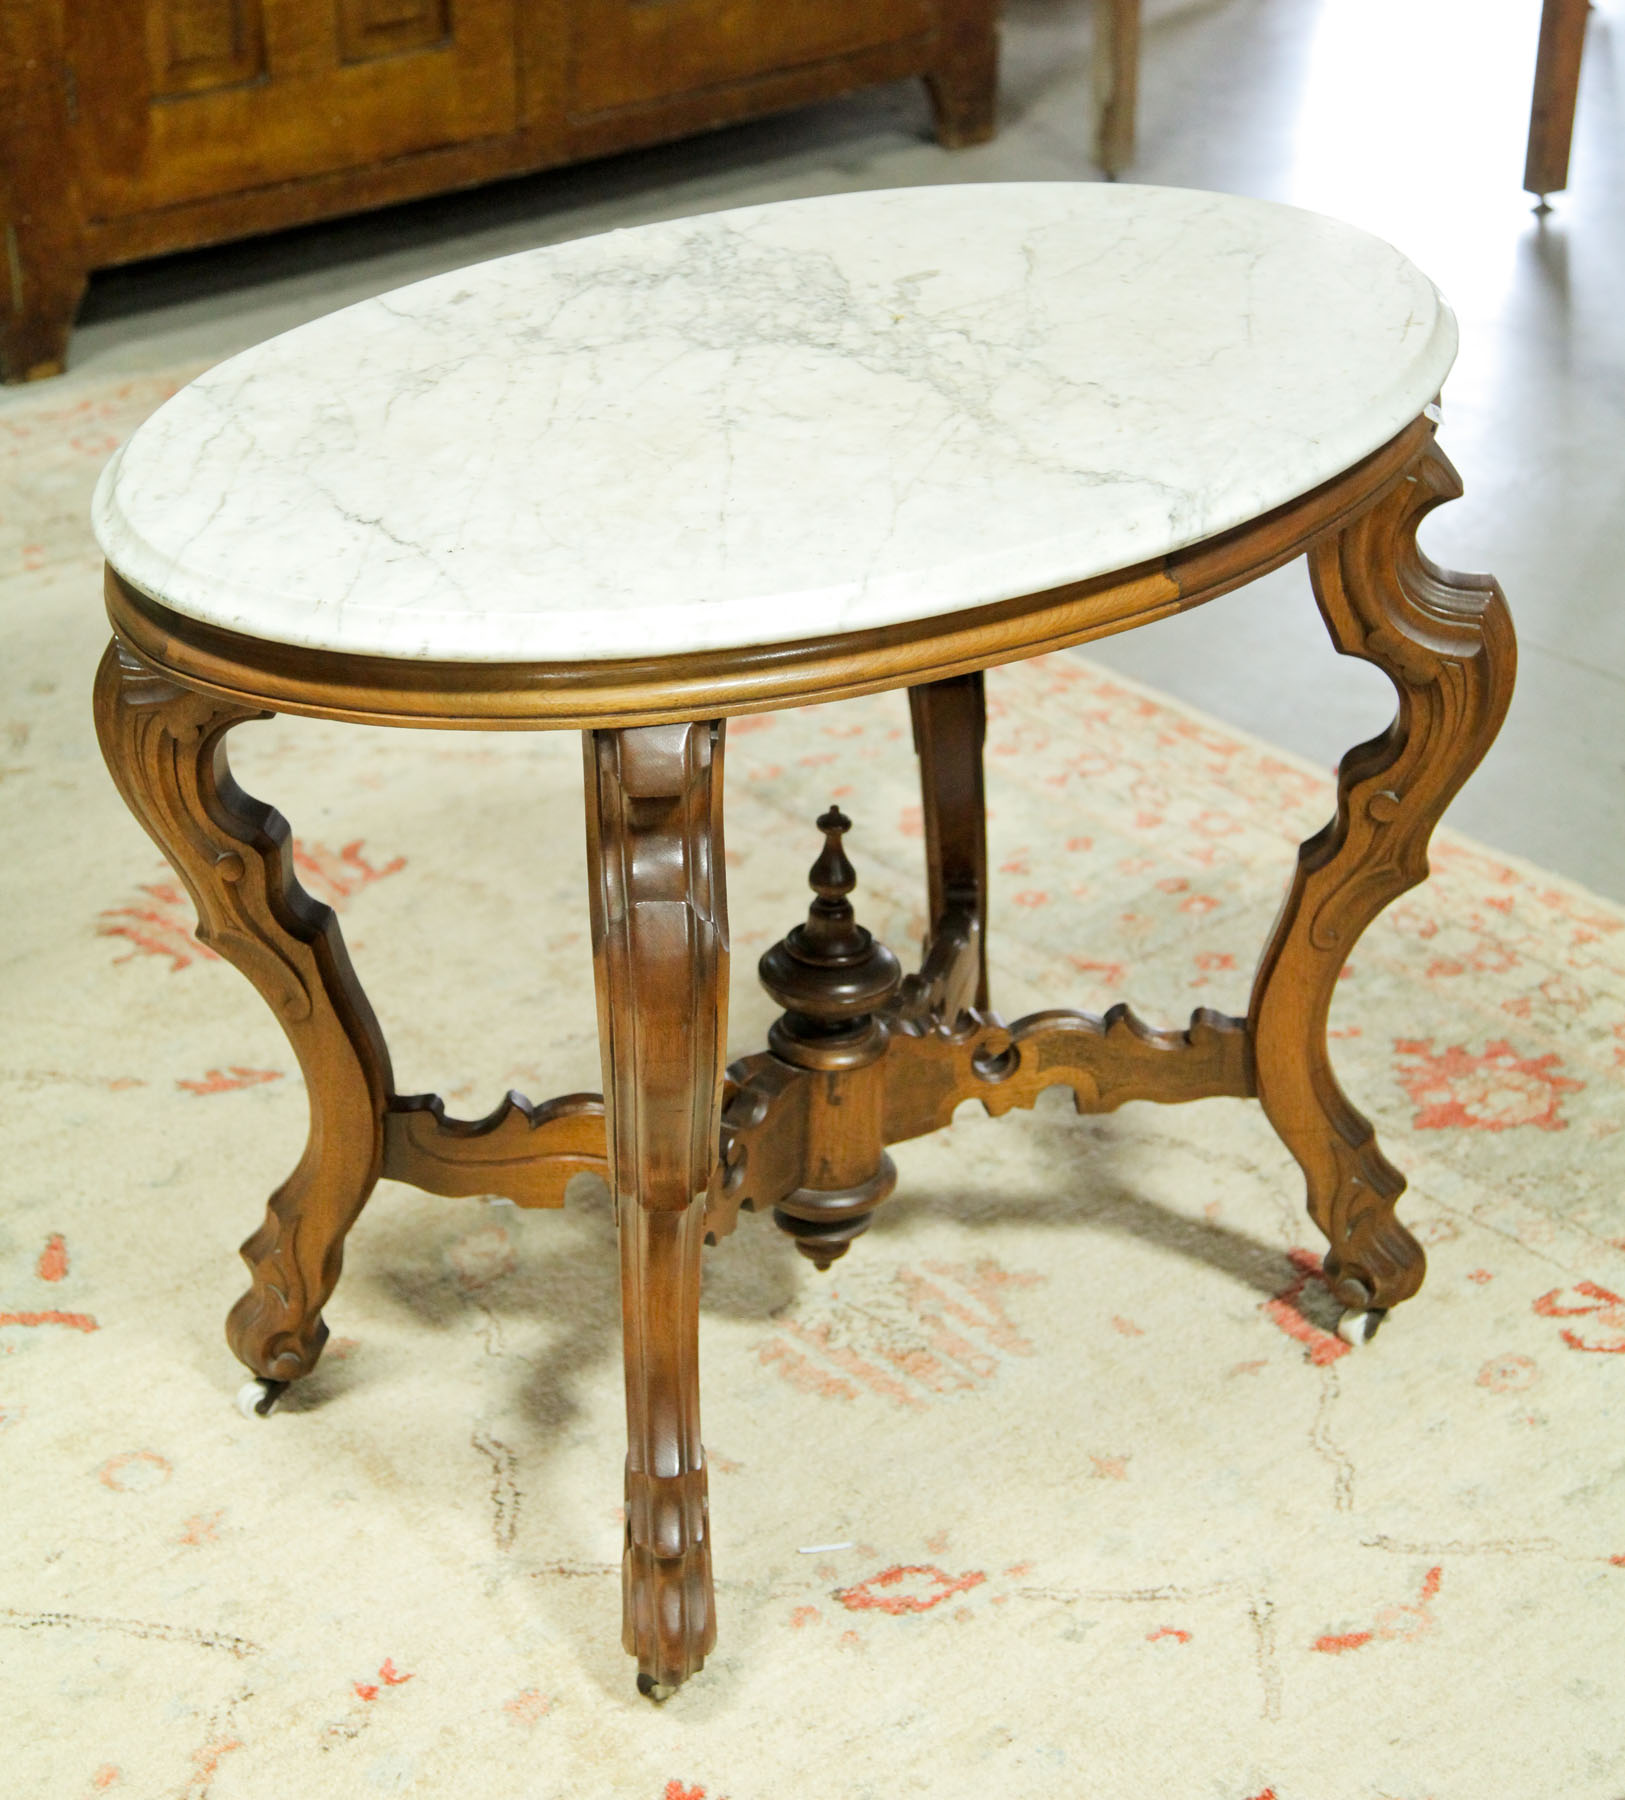 VICTORIAN PARLOR TABLE.  American  late 19th